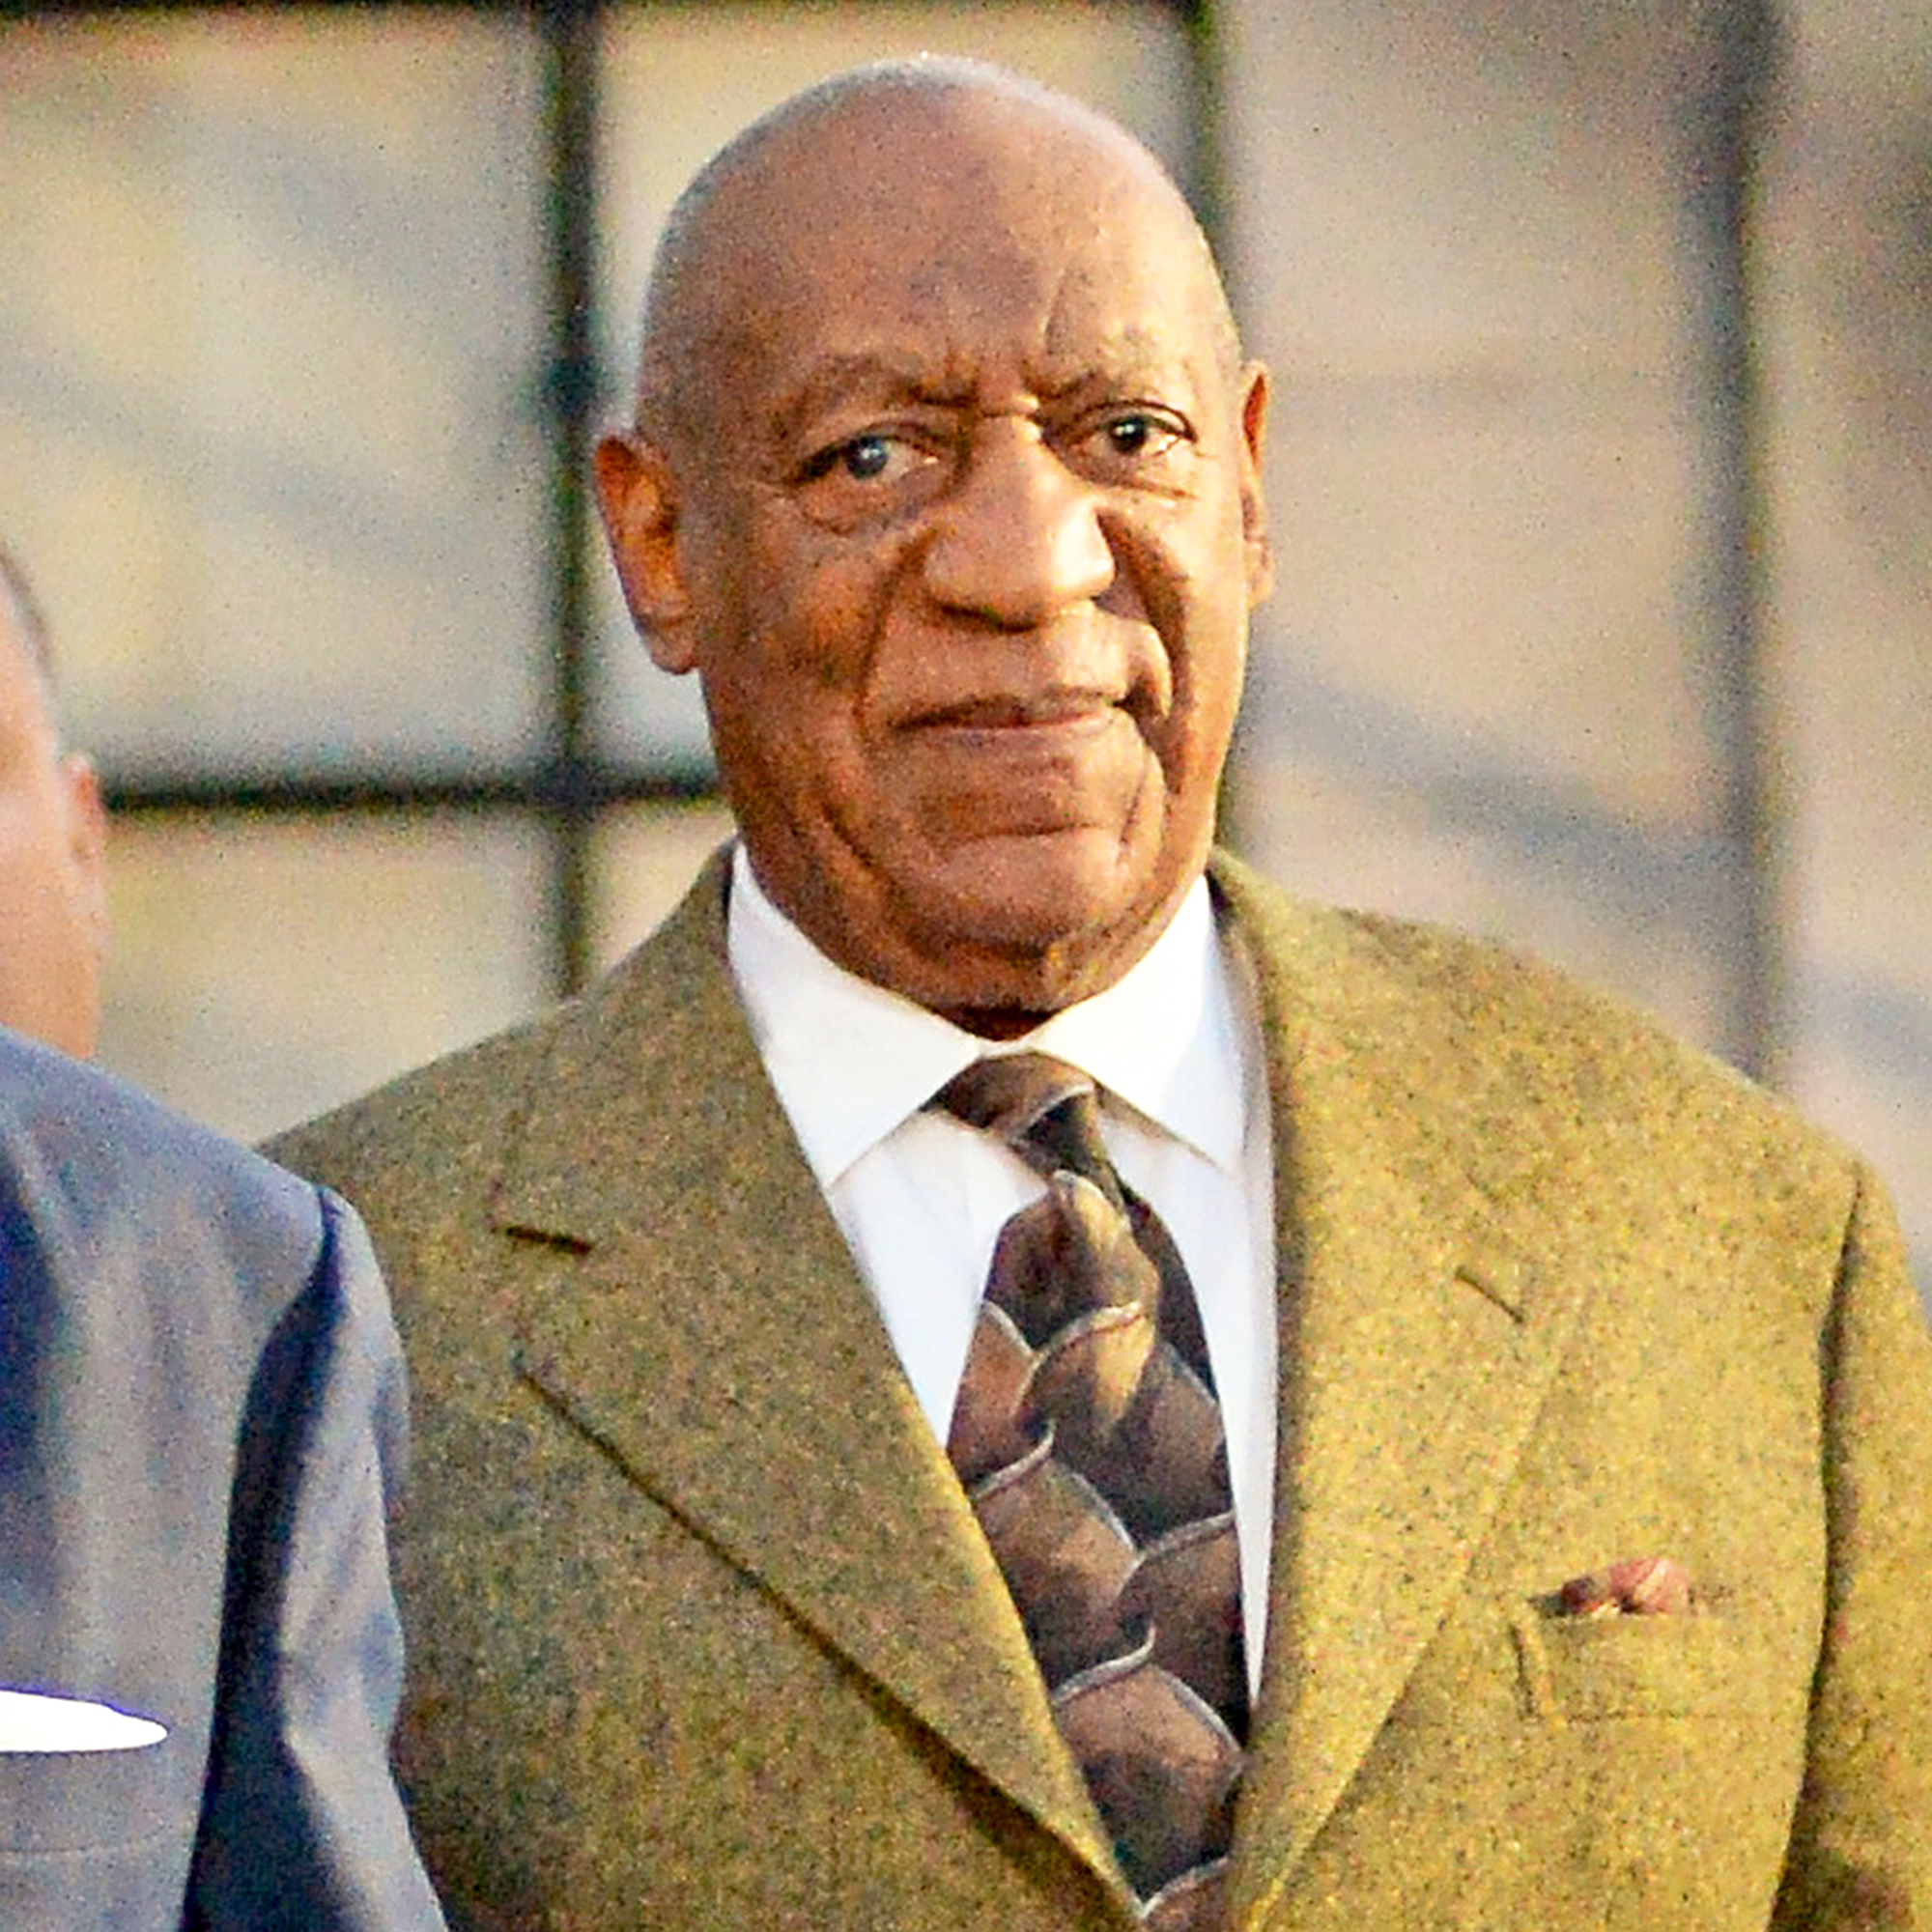 Bill Cosby: An American Scandal': See the First Look at the TV Special